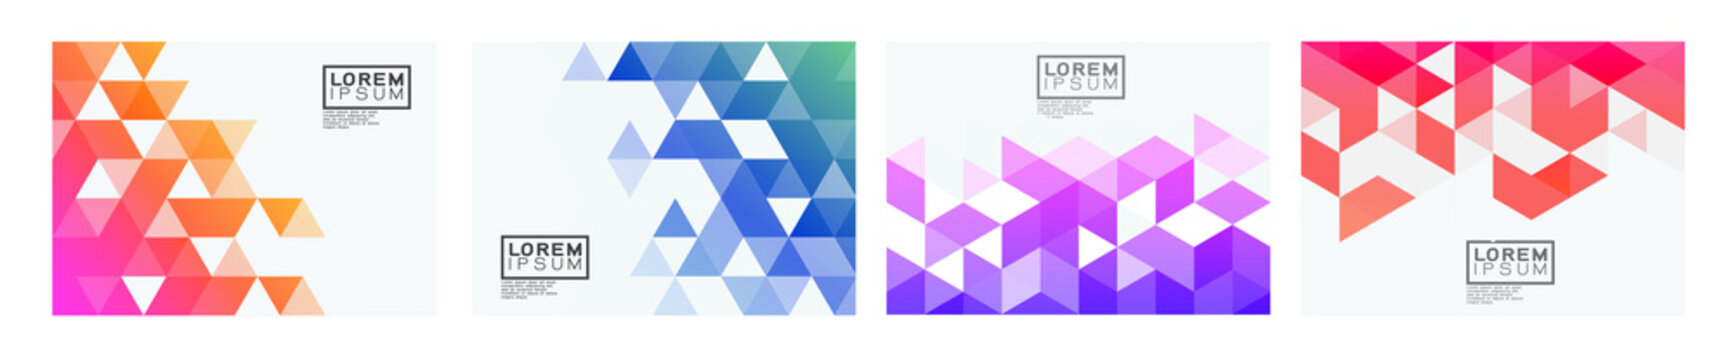 Set of colorful gradient triangle pattern on corner position with white space. Modern geometric background for business or corporate presentation. vector illustration